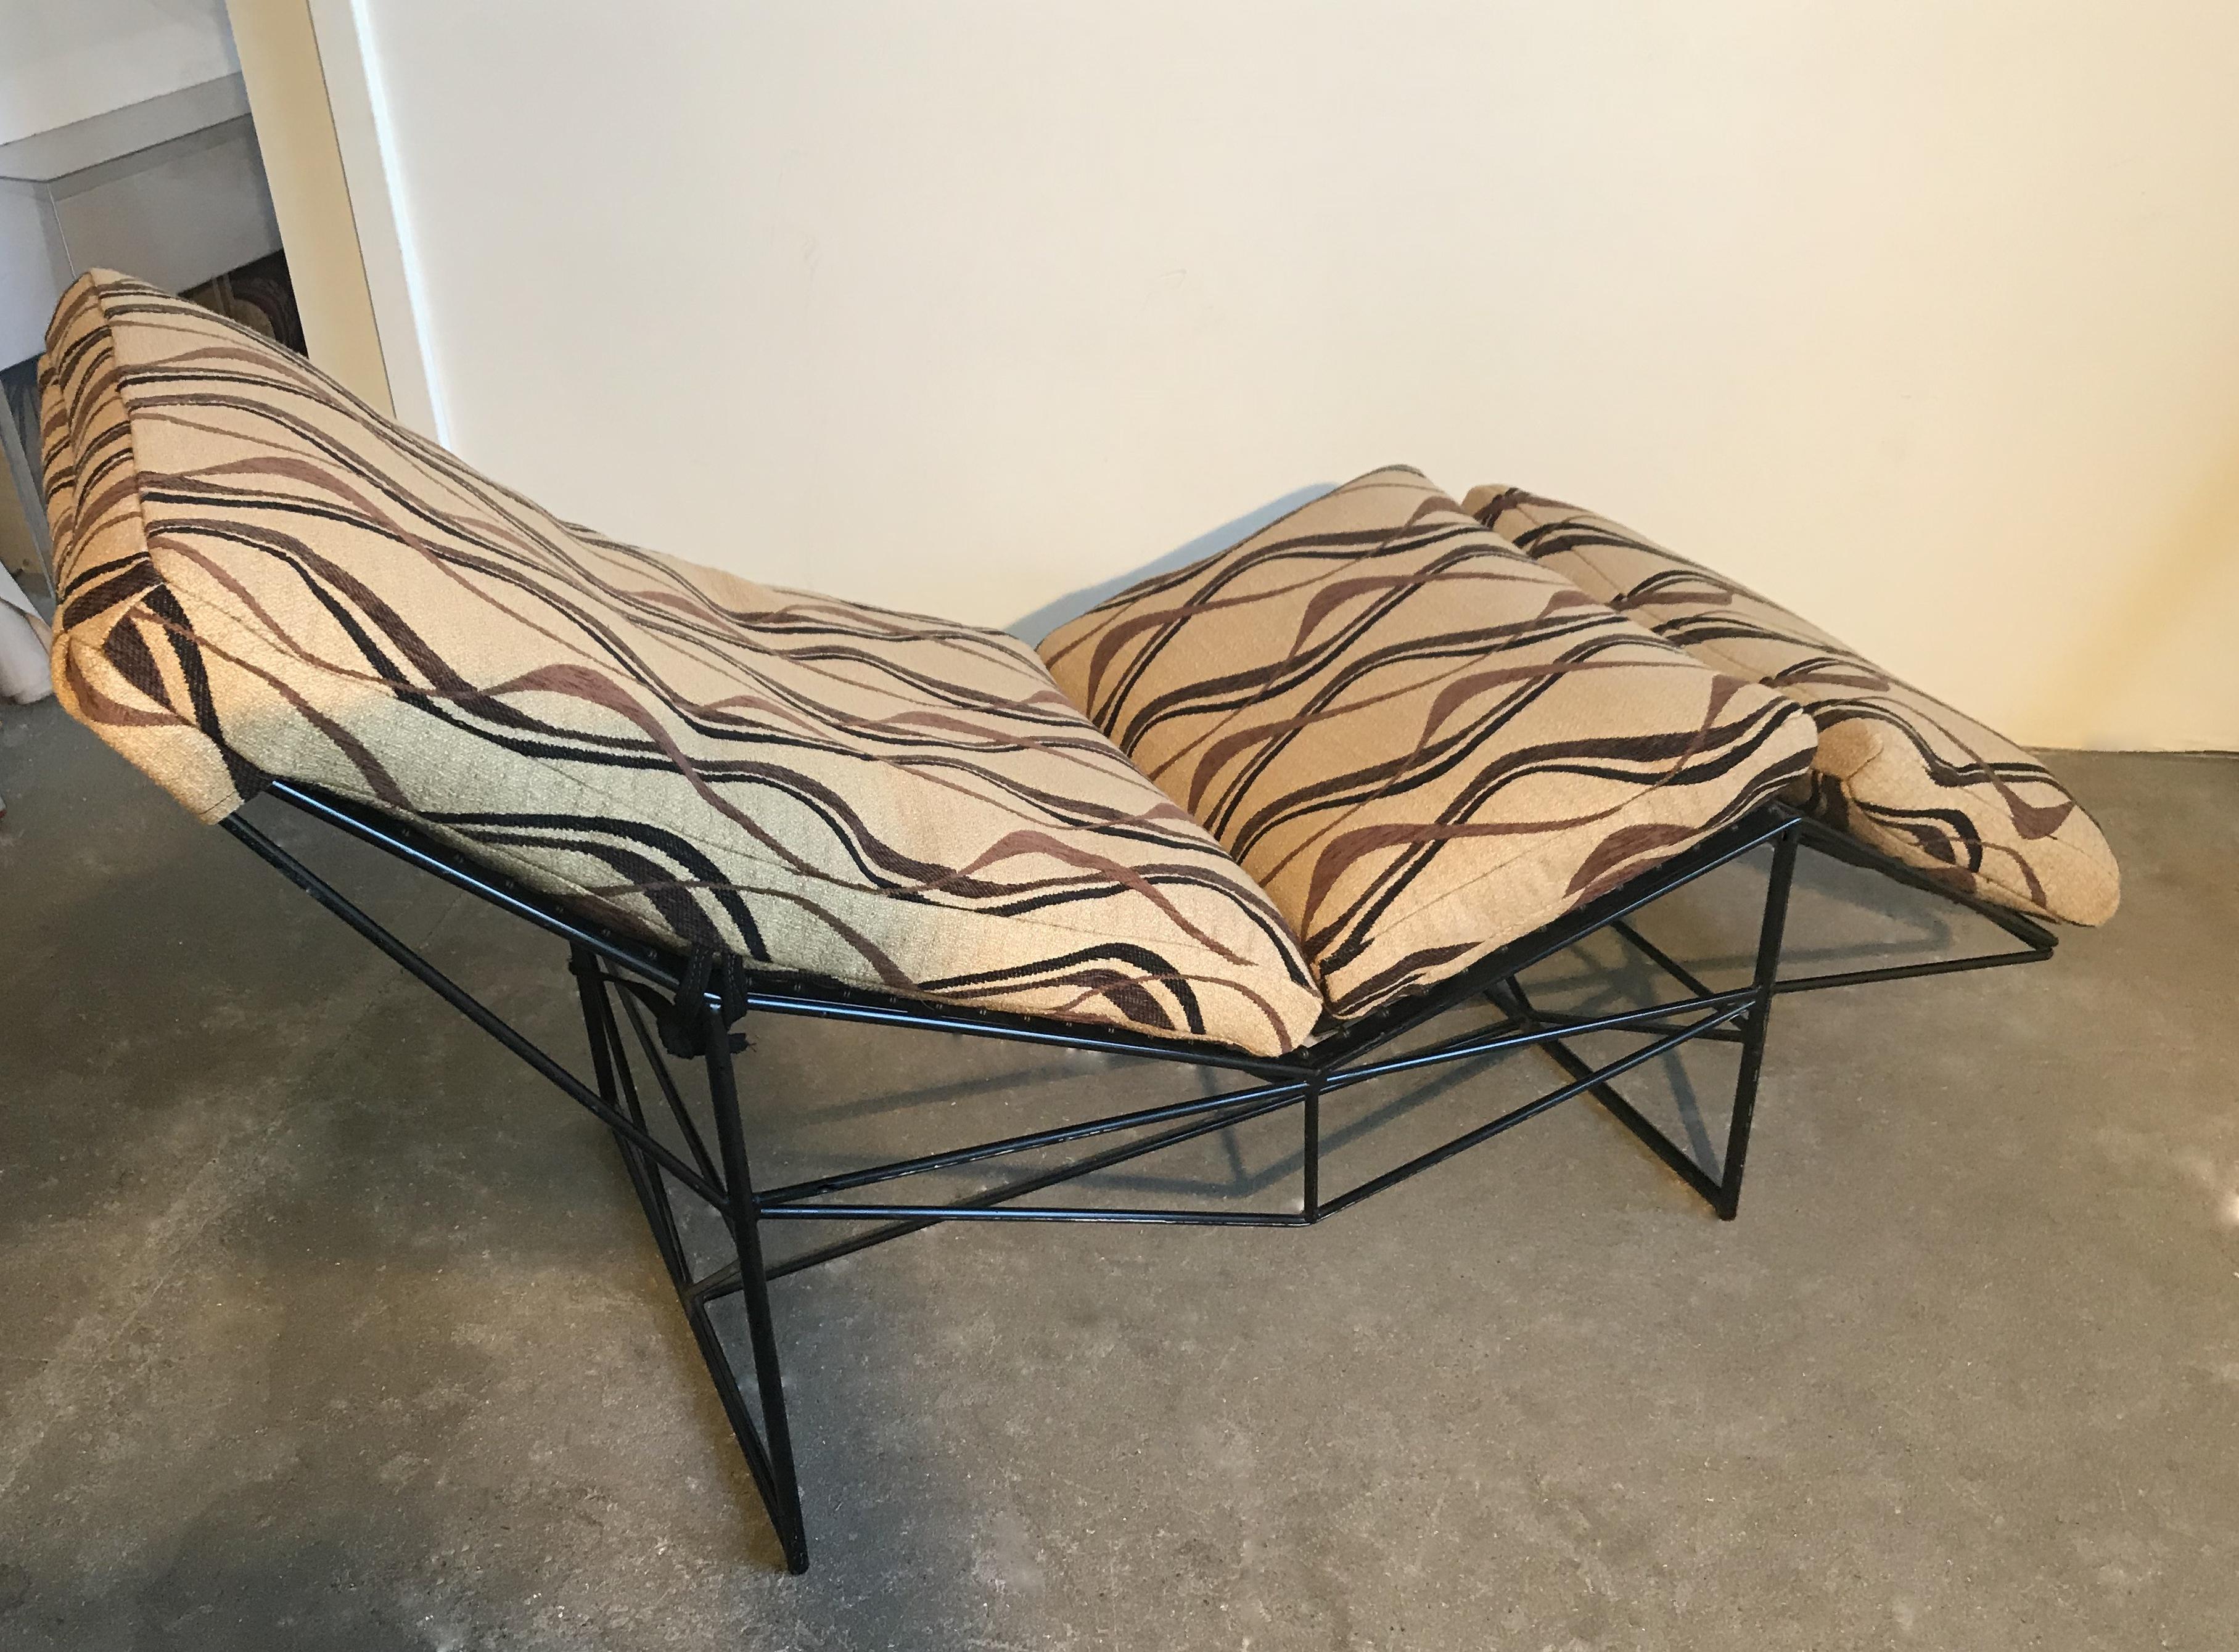 Sculptural Chaise Lounge by Paolo Passerini, 1985 (20. Jahrhundert)